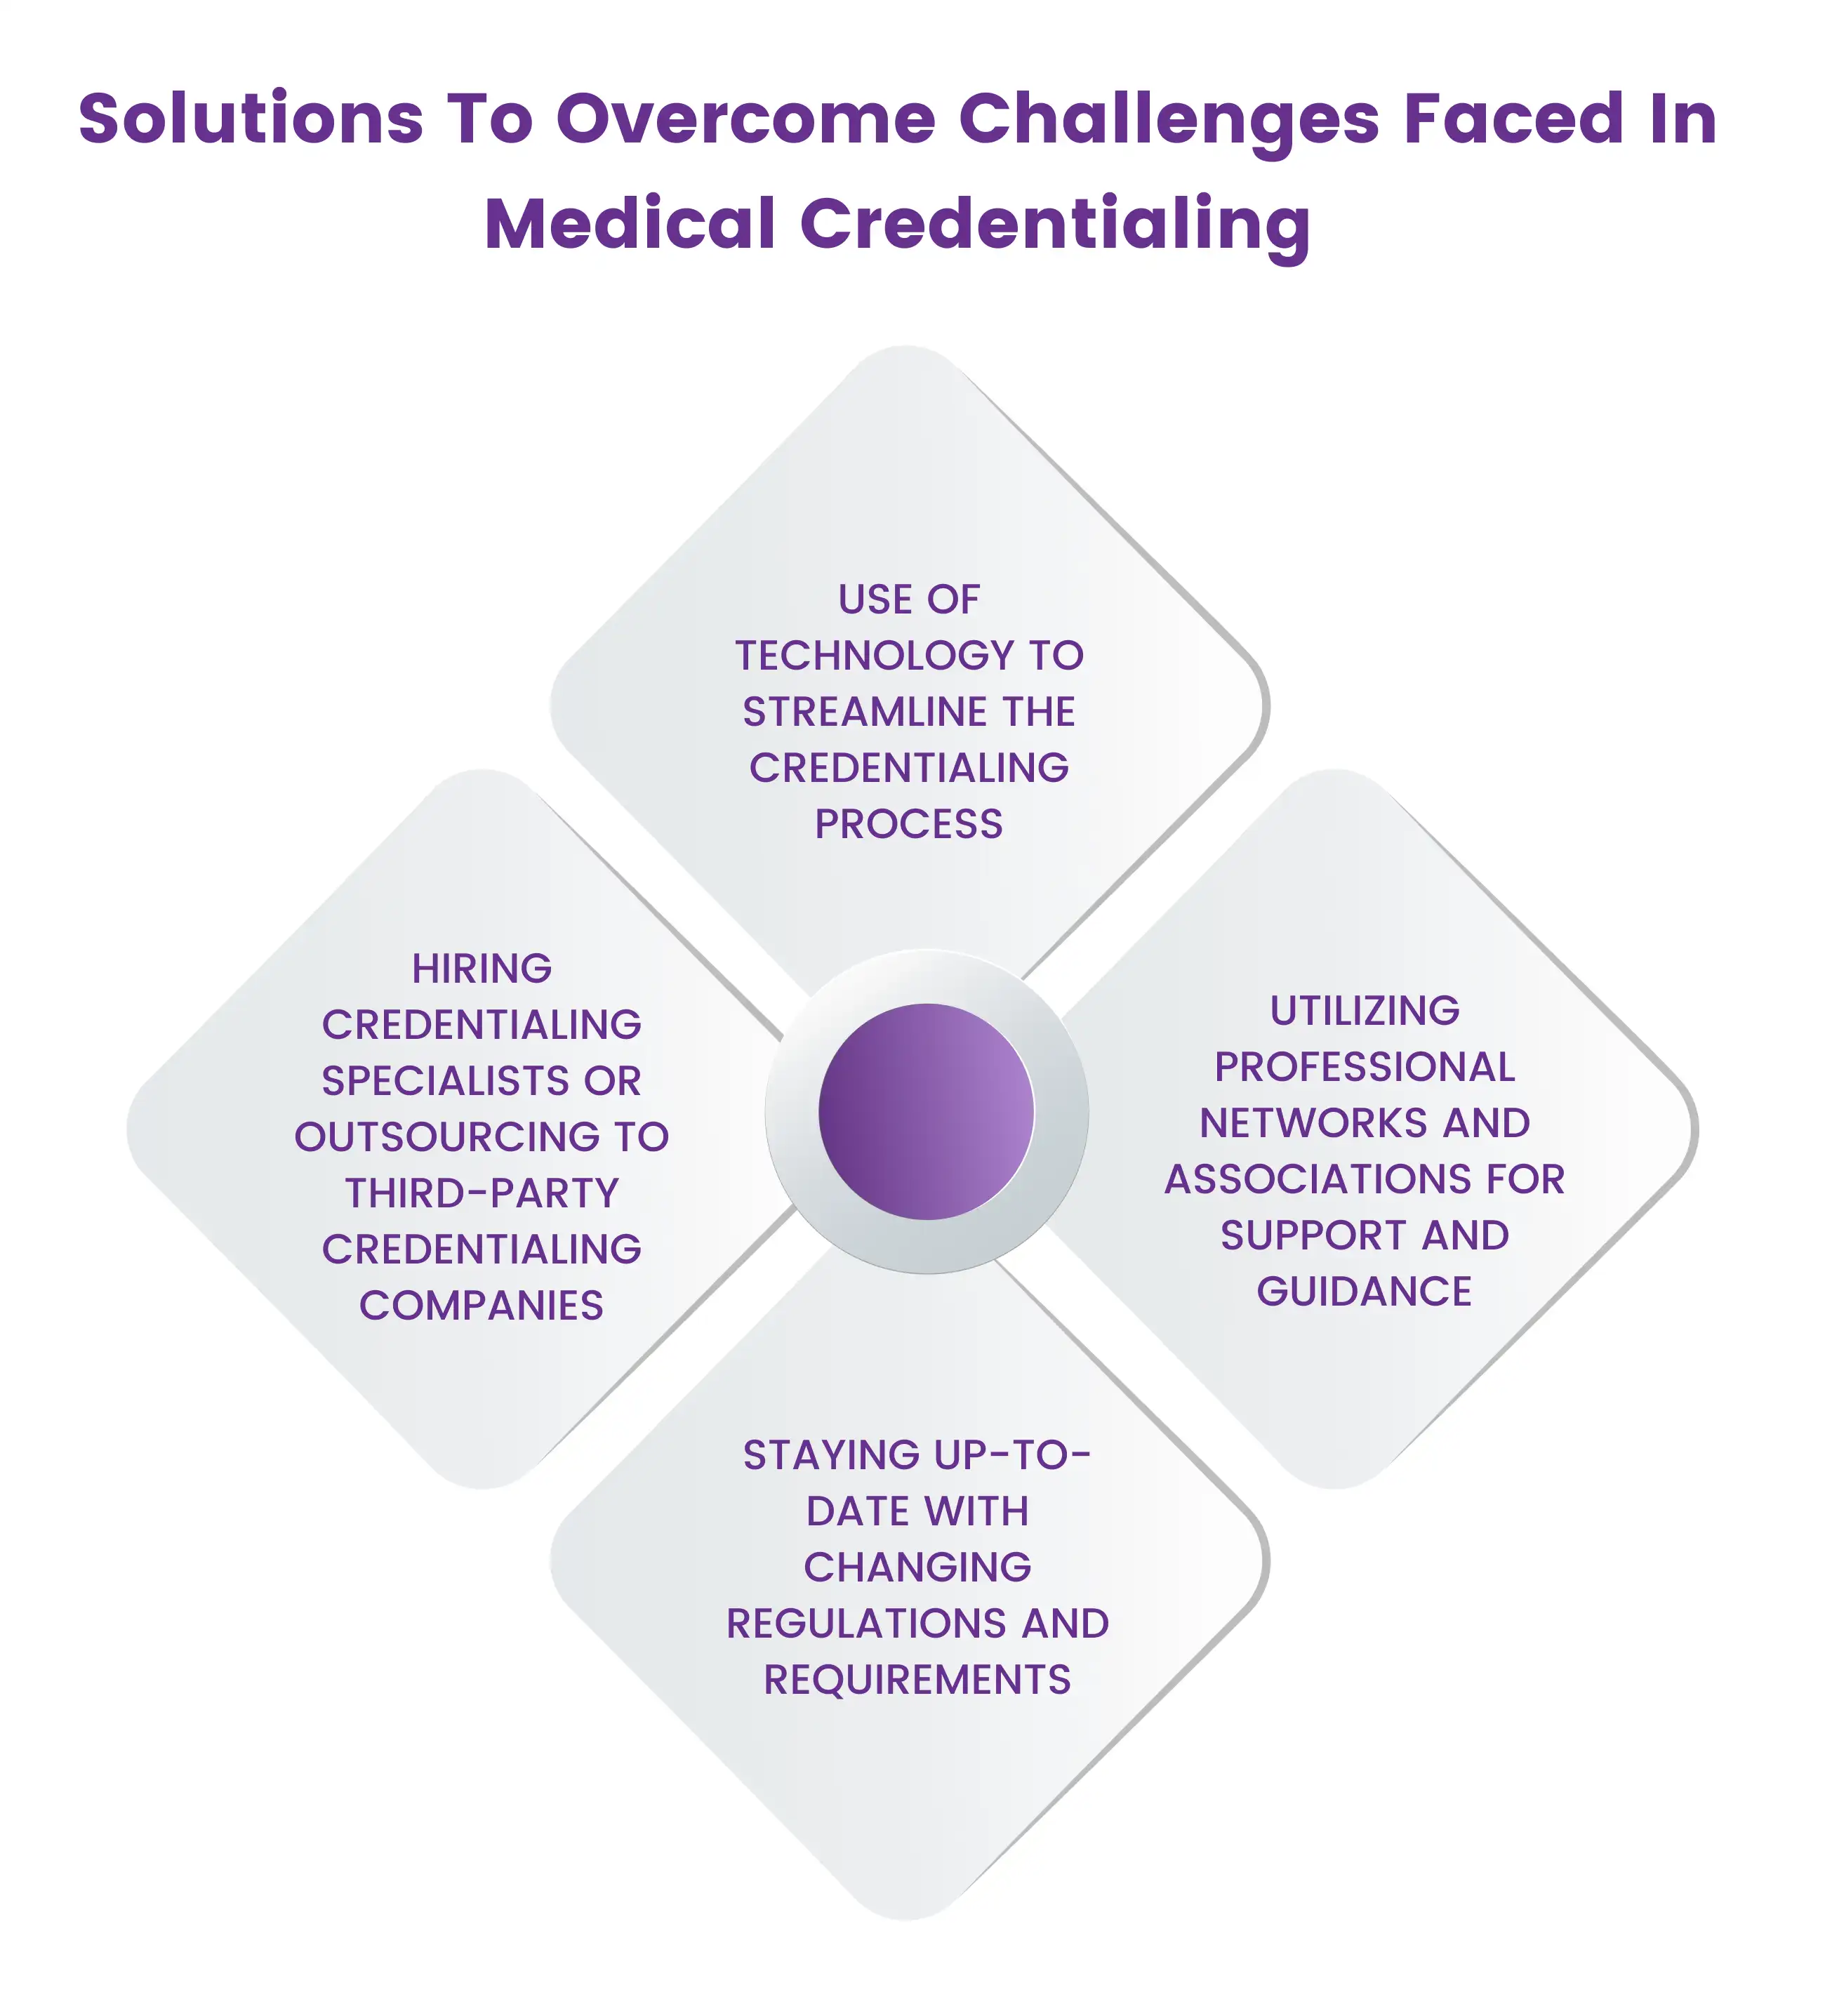 solutions-to-overcome-medical-credentialing-challenges